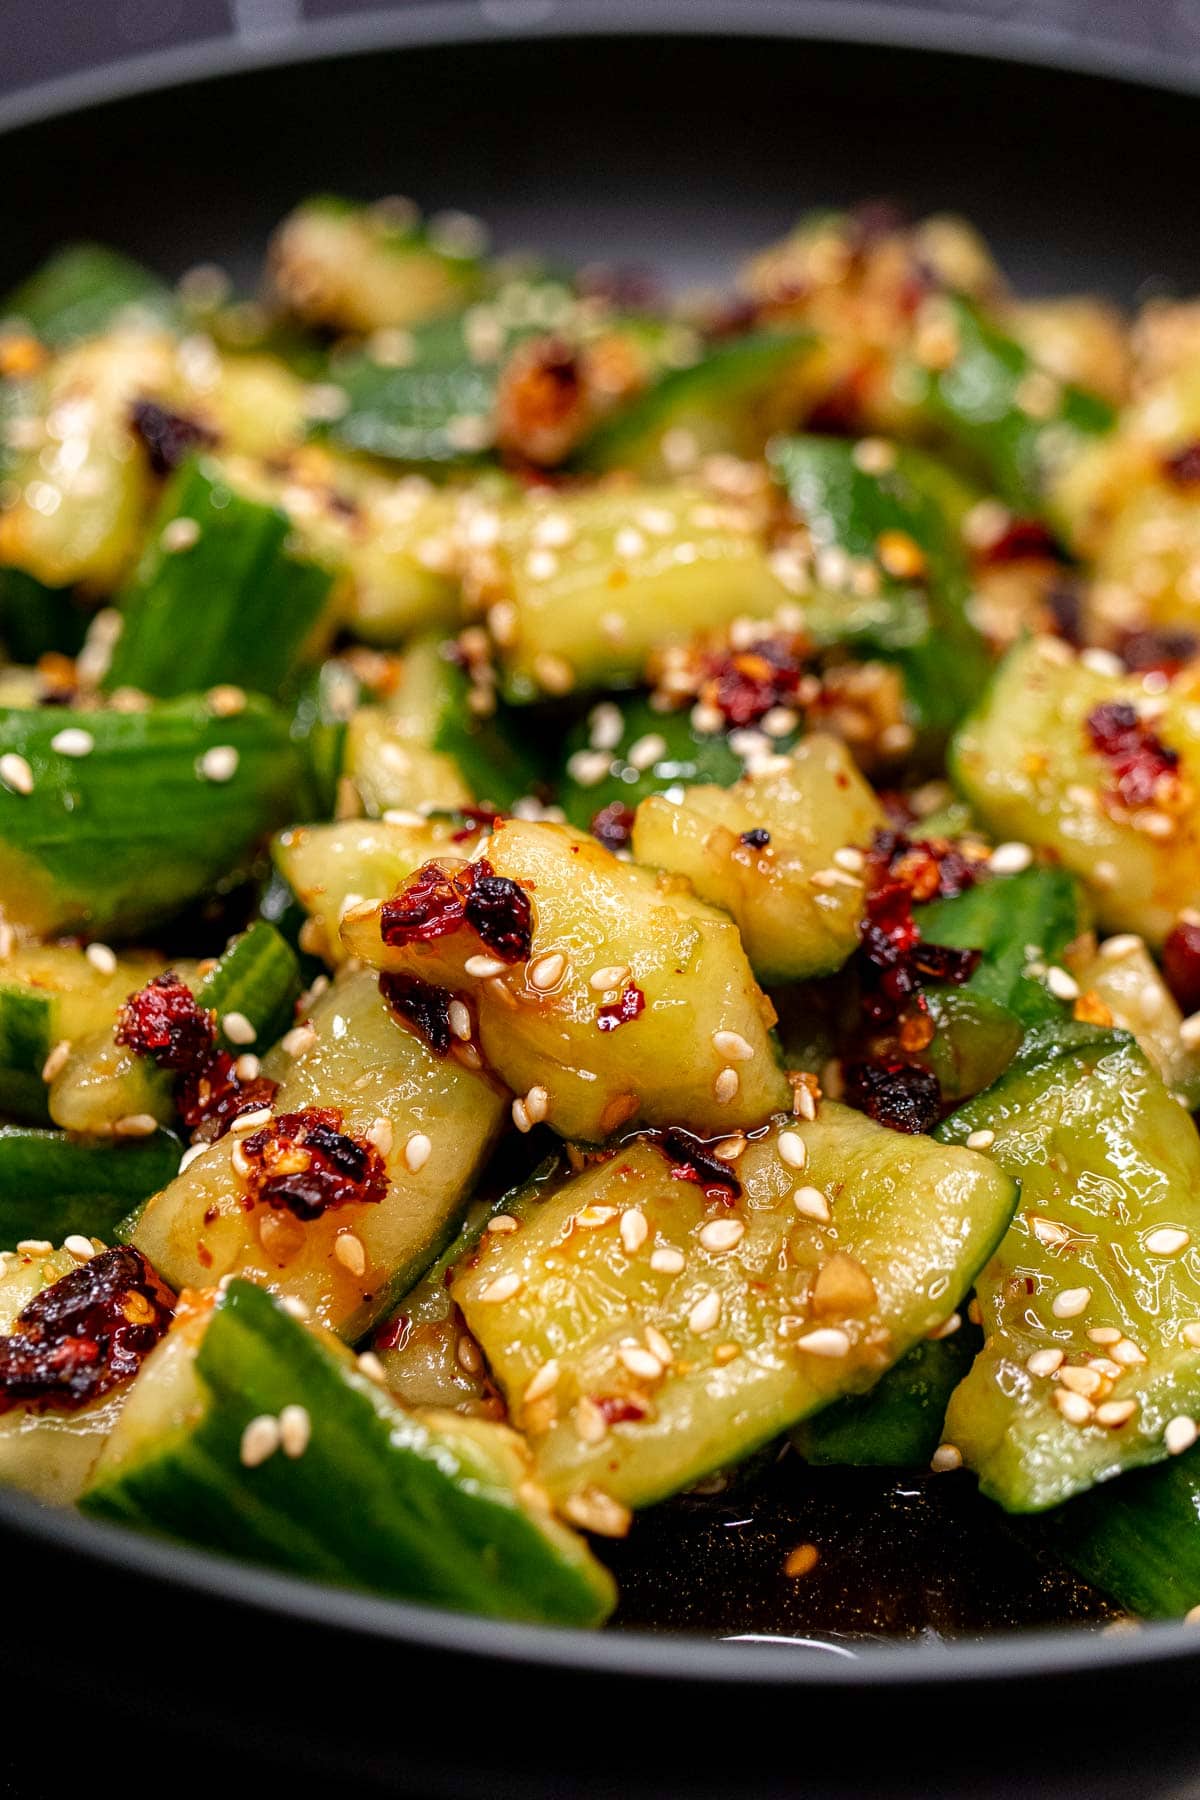 Close view of Chinese smashed cucumber salad with sesame seeds and chili crisp.